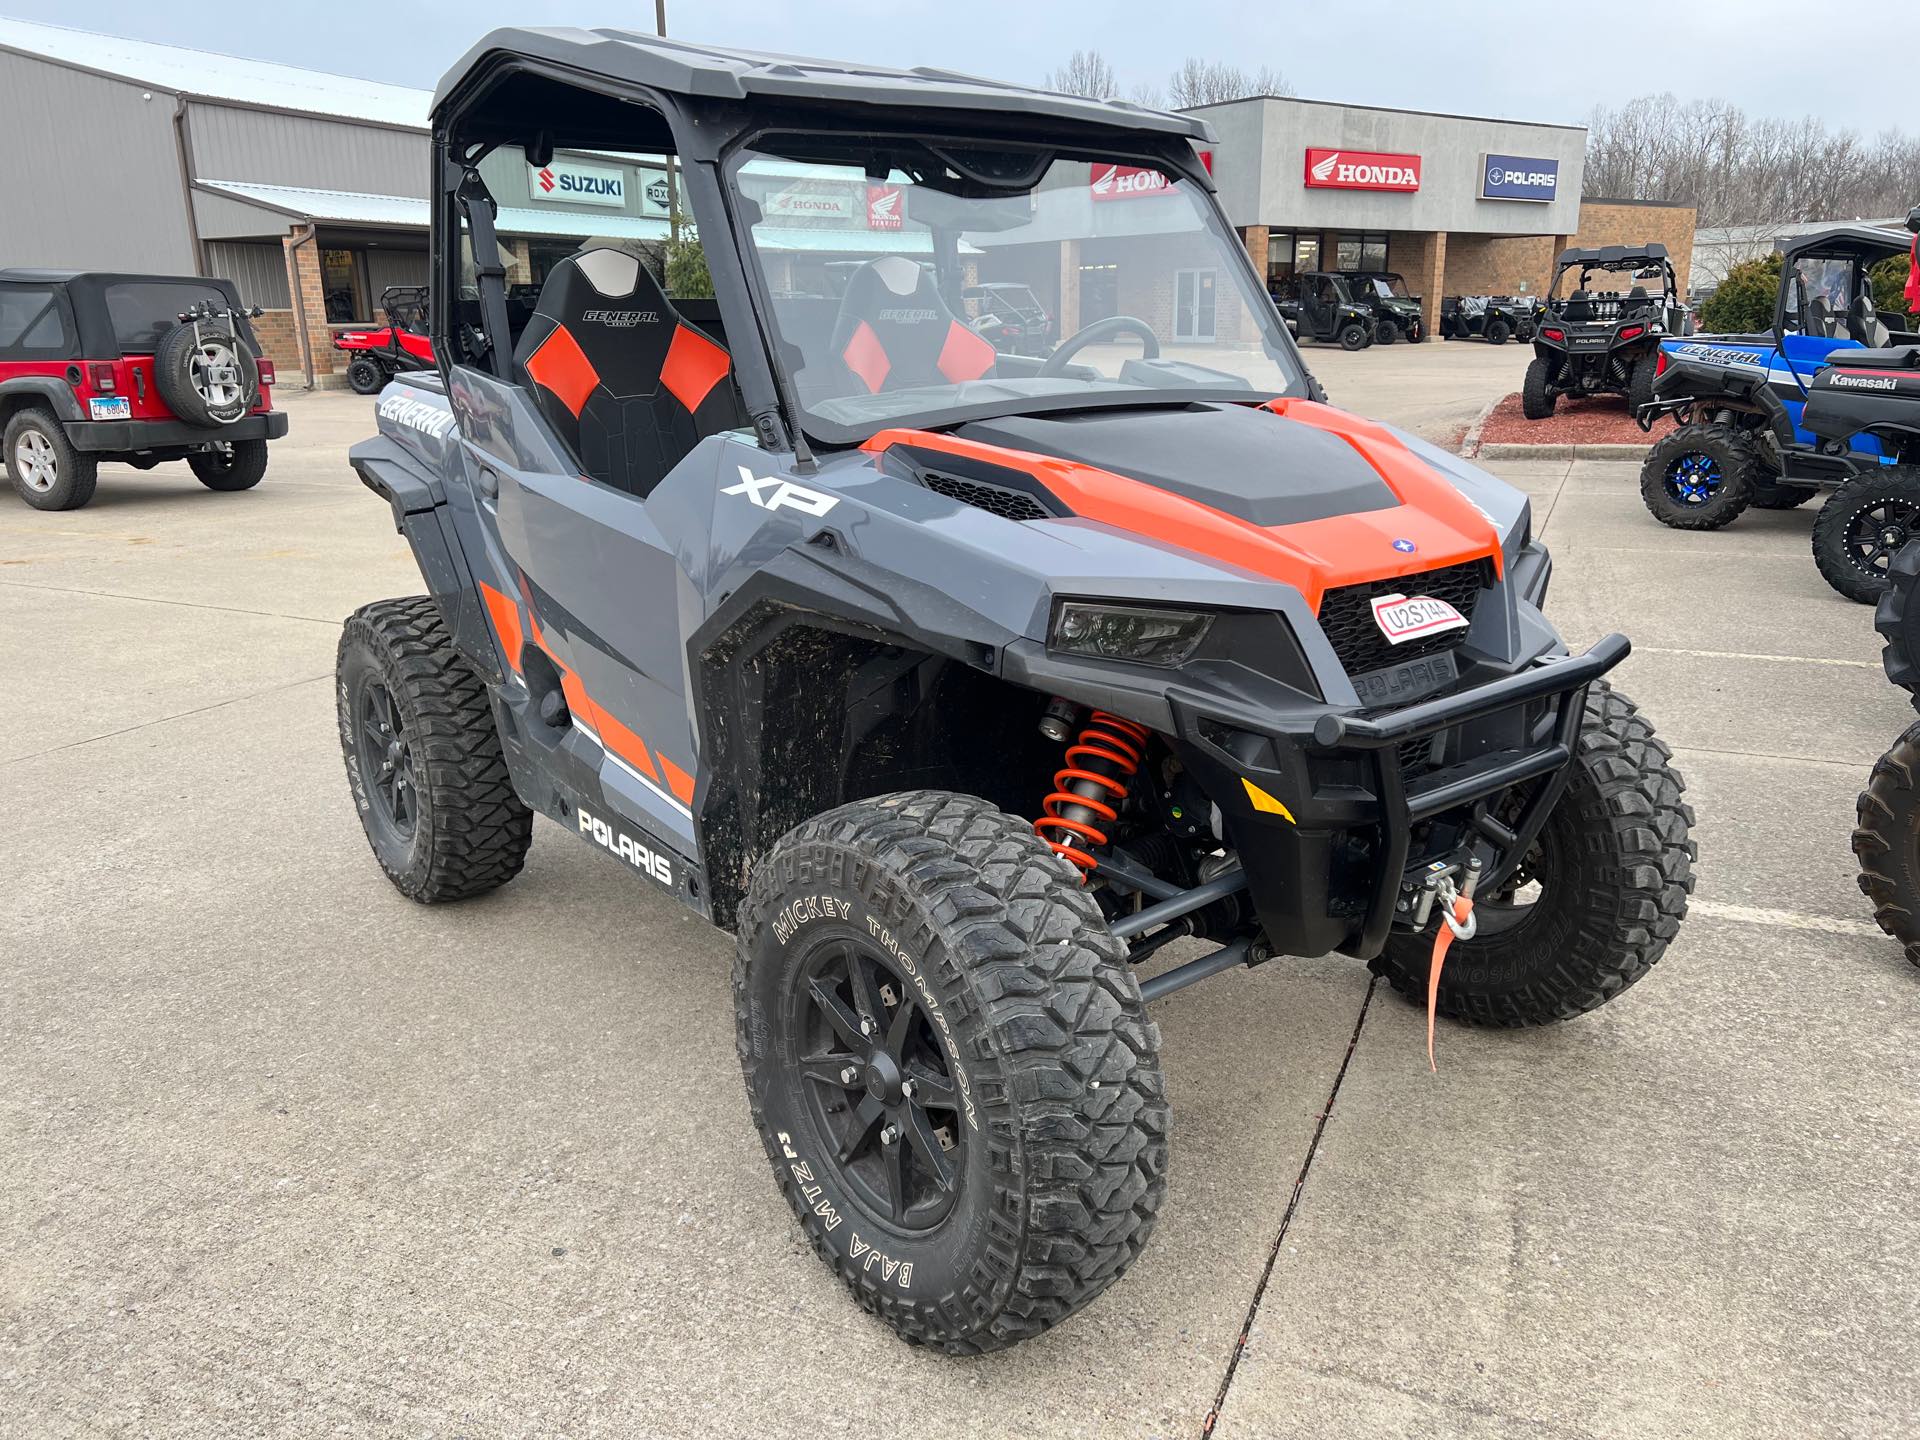 2020 Polaris GENERAL XP 1000 Deluxe at Southern Illinois Motorsports